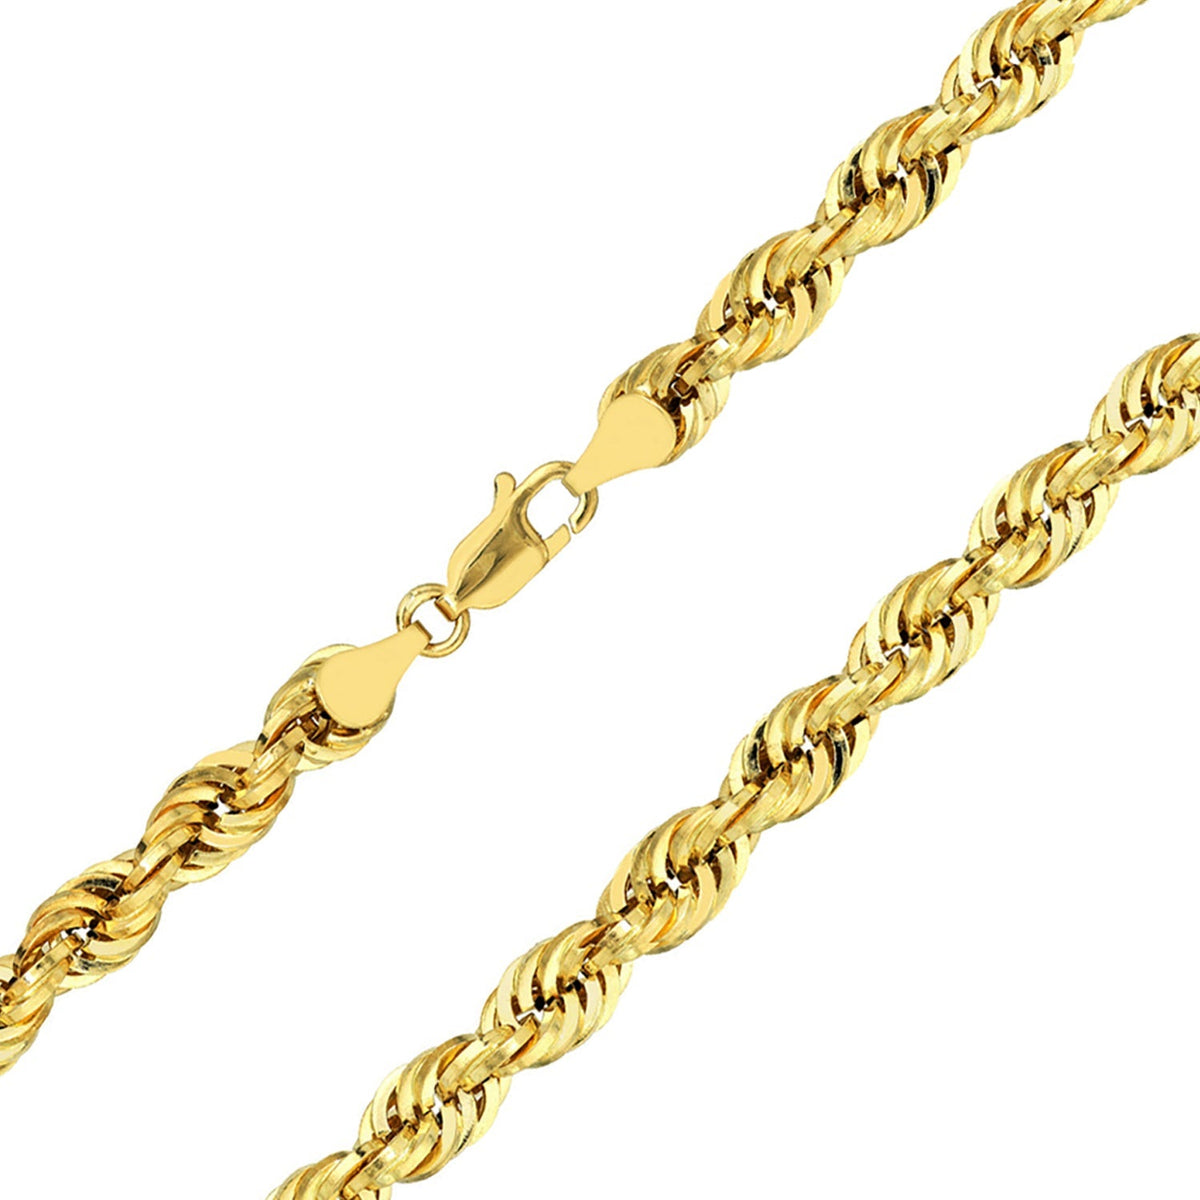 14k Yellow Gold Hollow 10mm Rope Chain Necklace with Lobster Lock - Very Thick Light Rope Chain with Diamond Cut